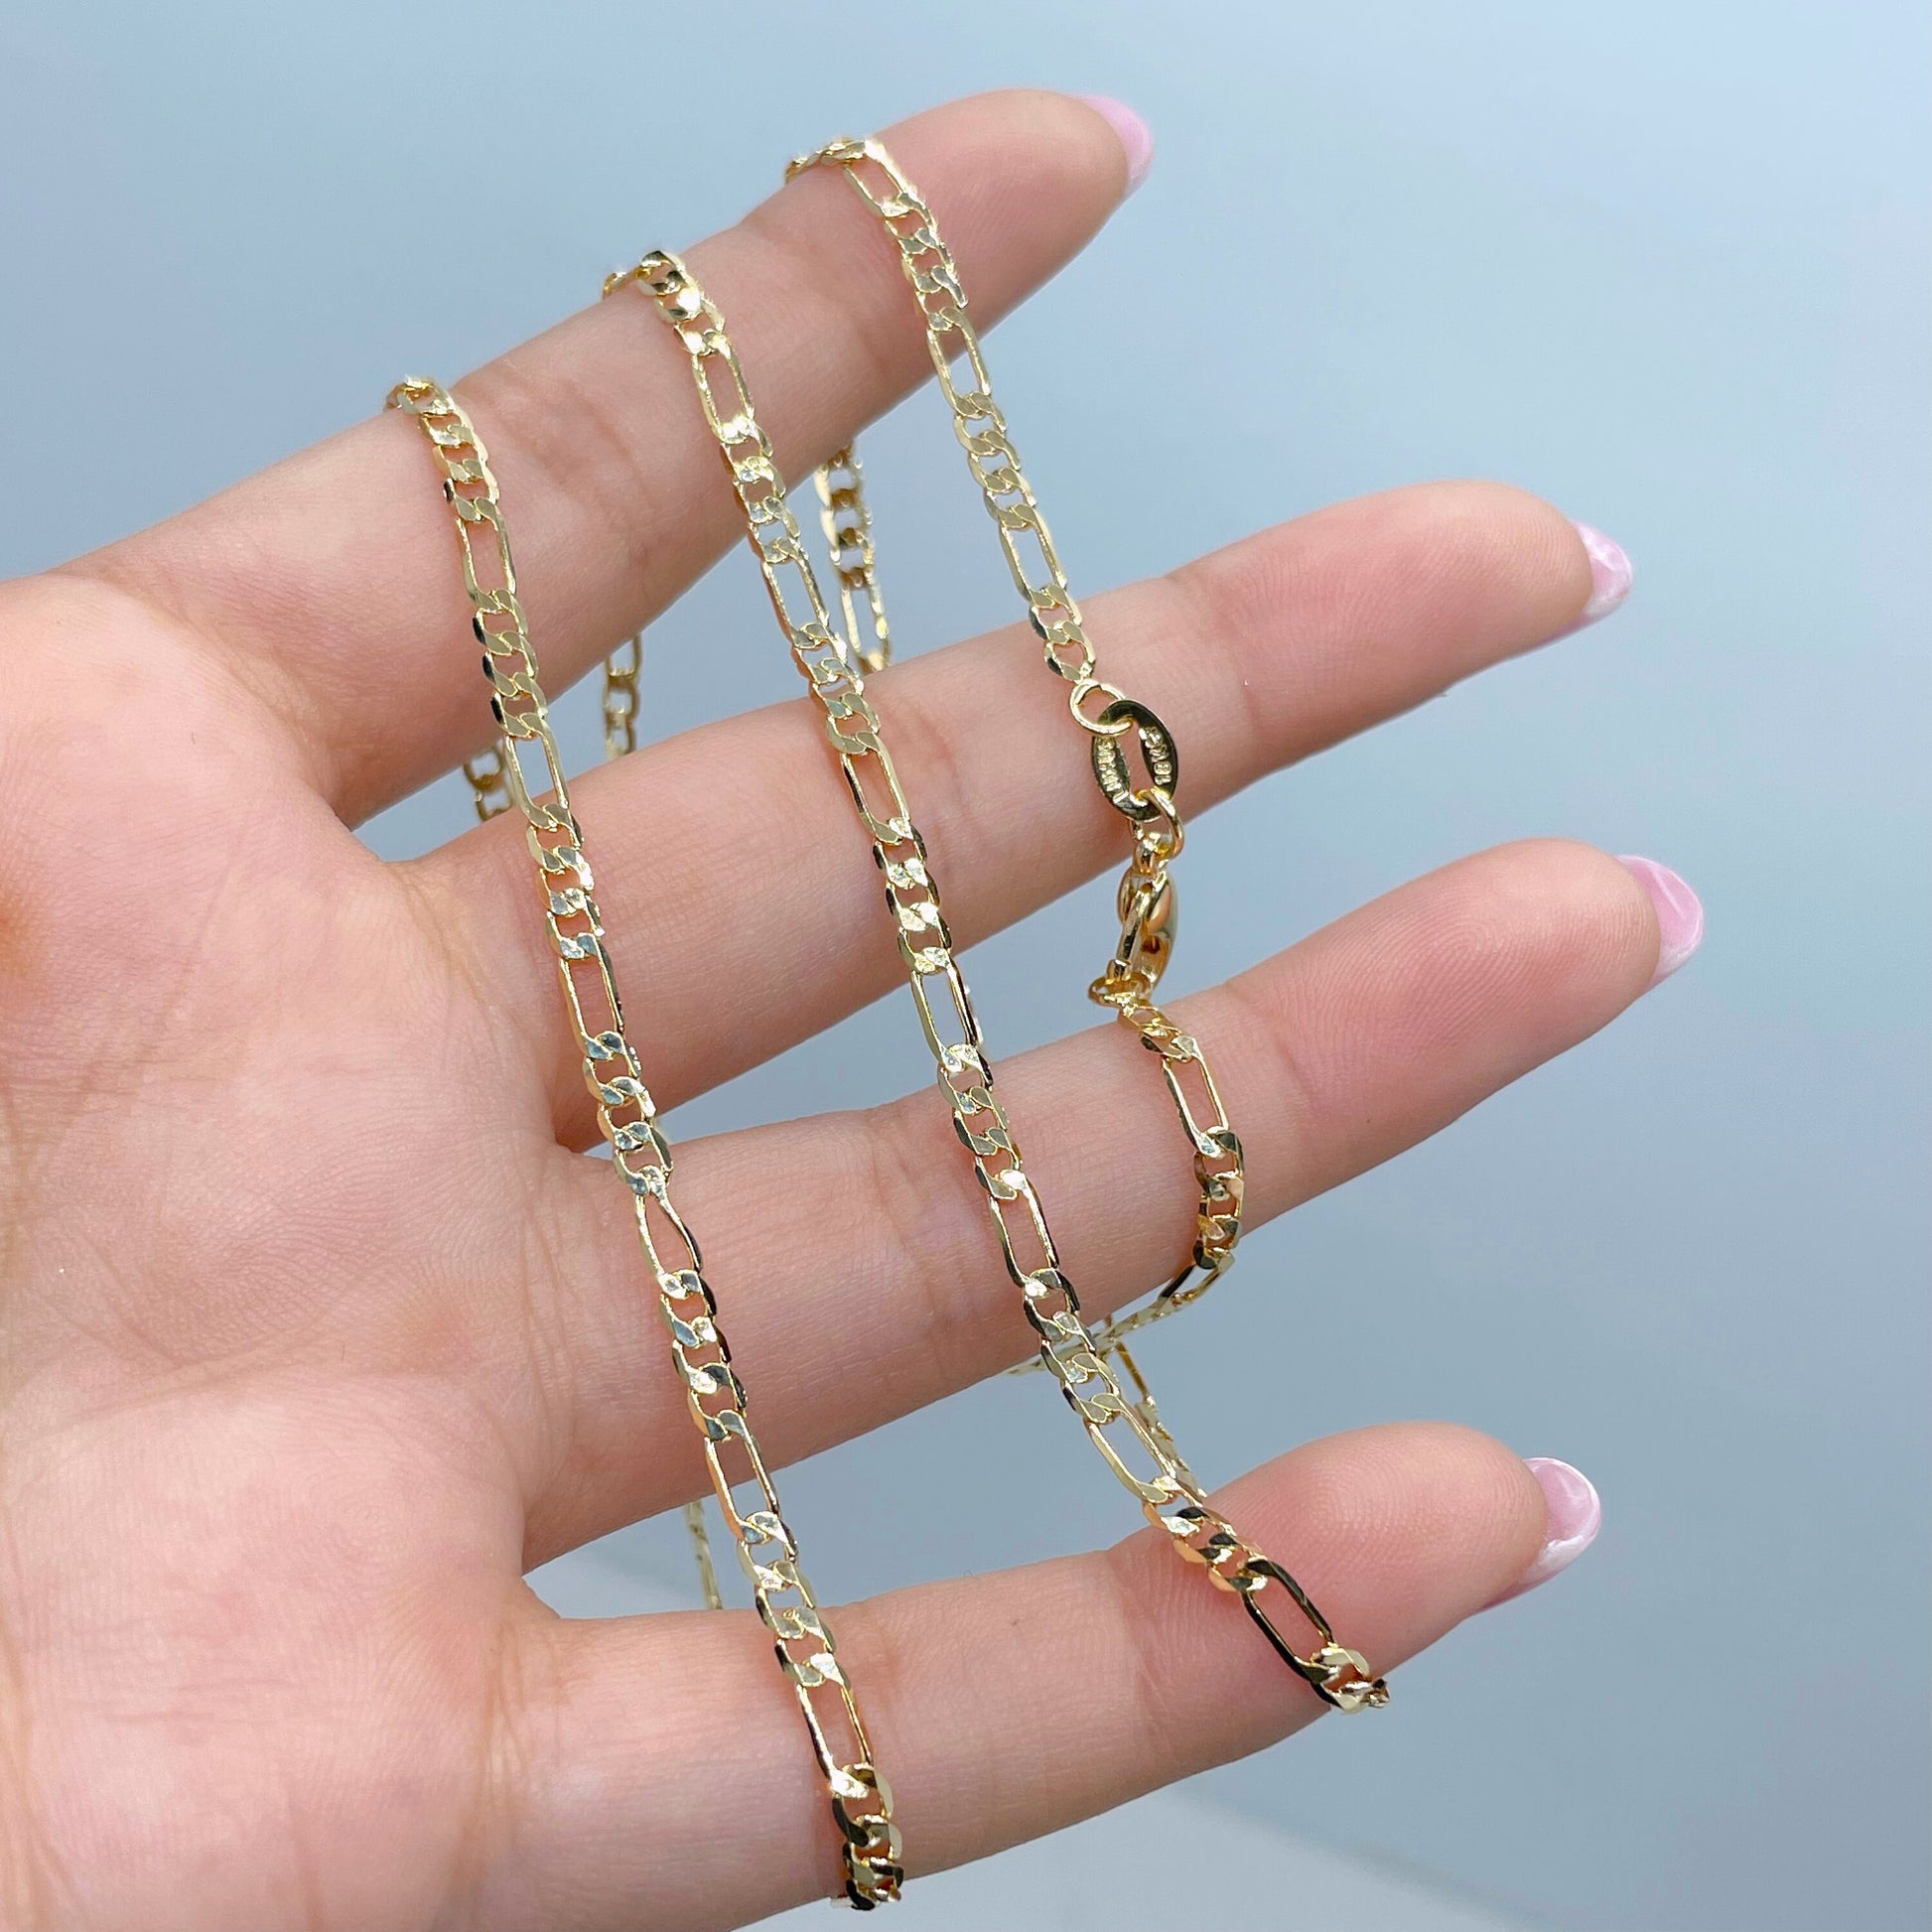 18k Gold Filled 3mm Figaro Link, 24 inches of length, Chains Wholesale and Jewelry Supplies